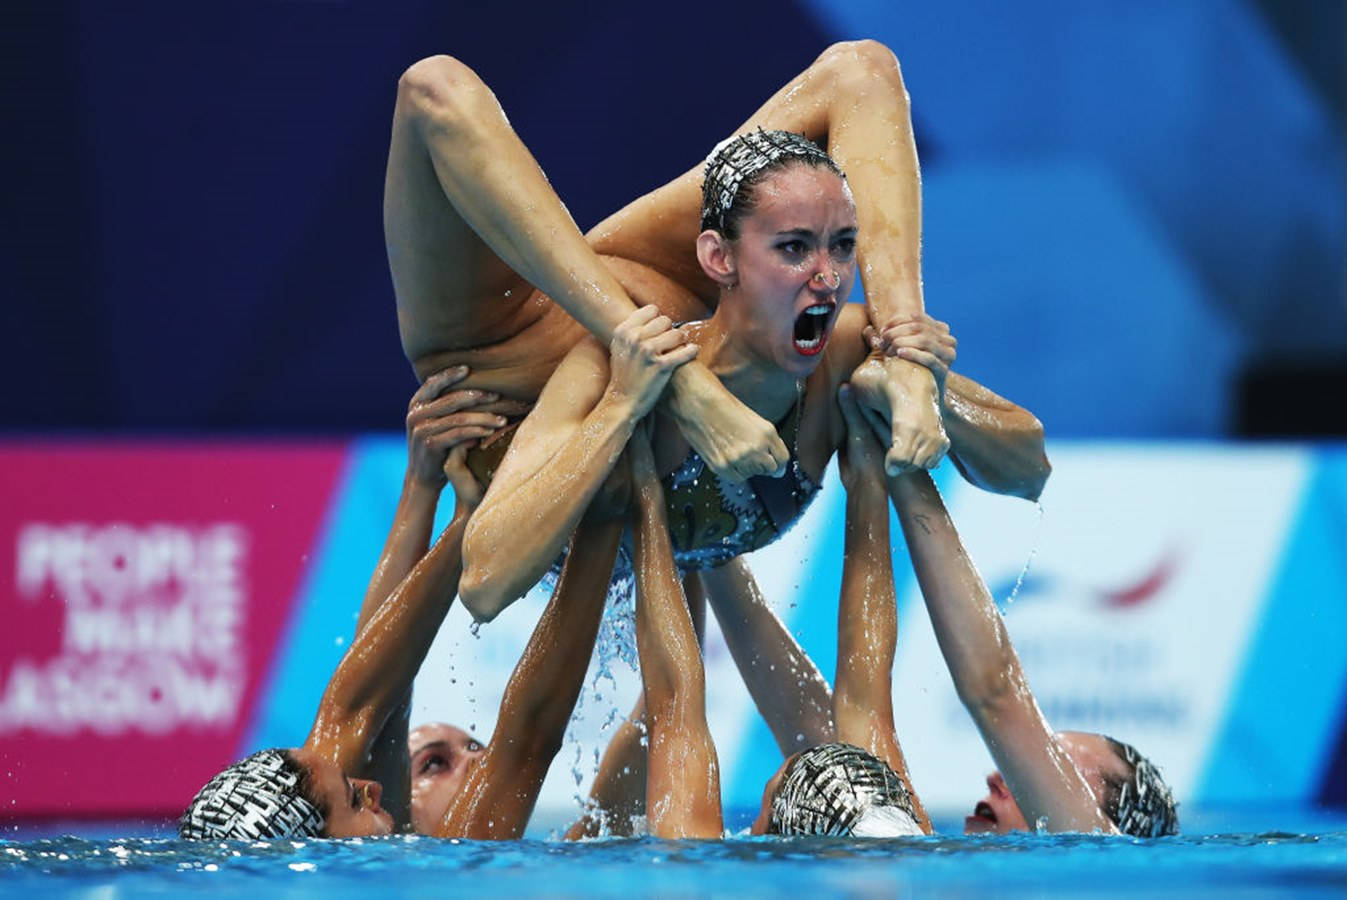 Synchronized Swimming Performance at the Olympics Wallpaper